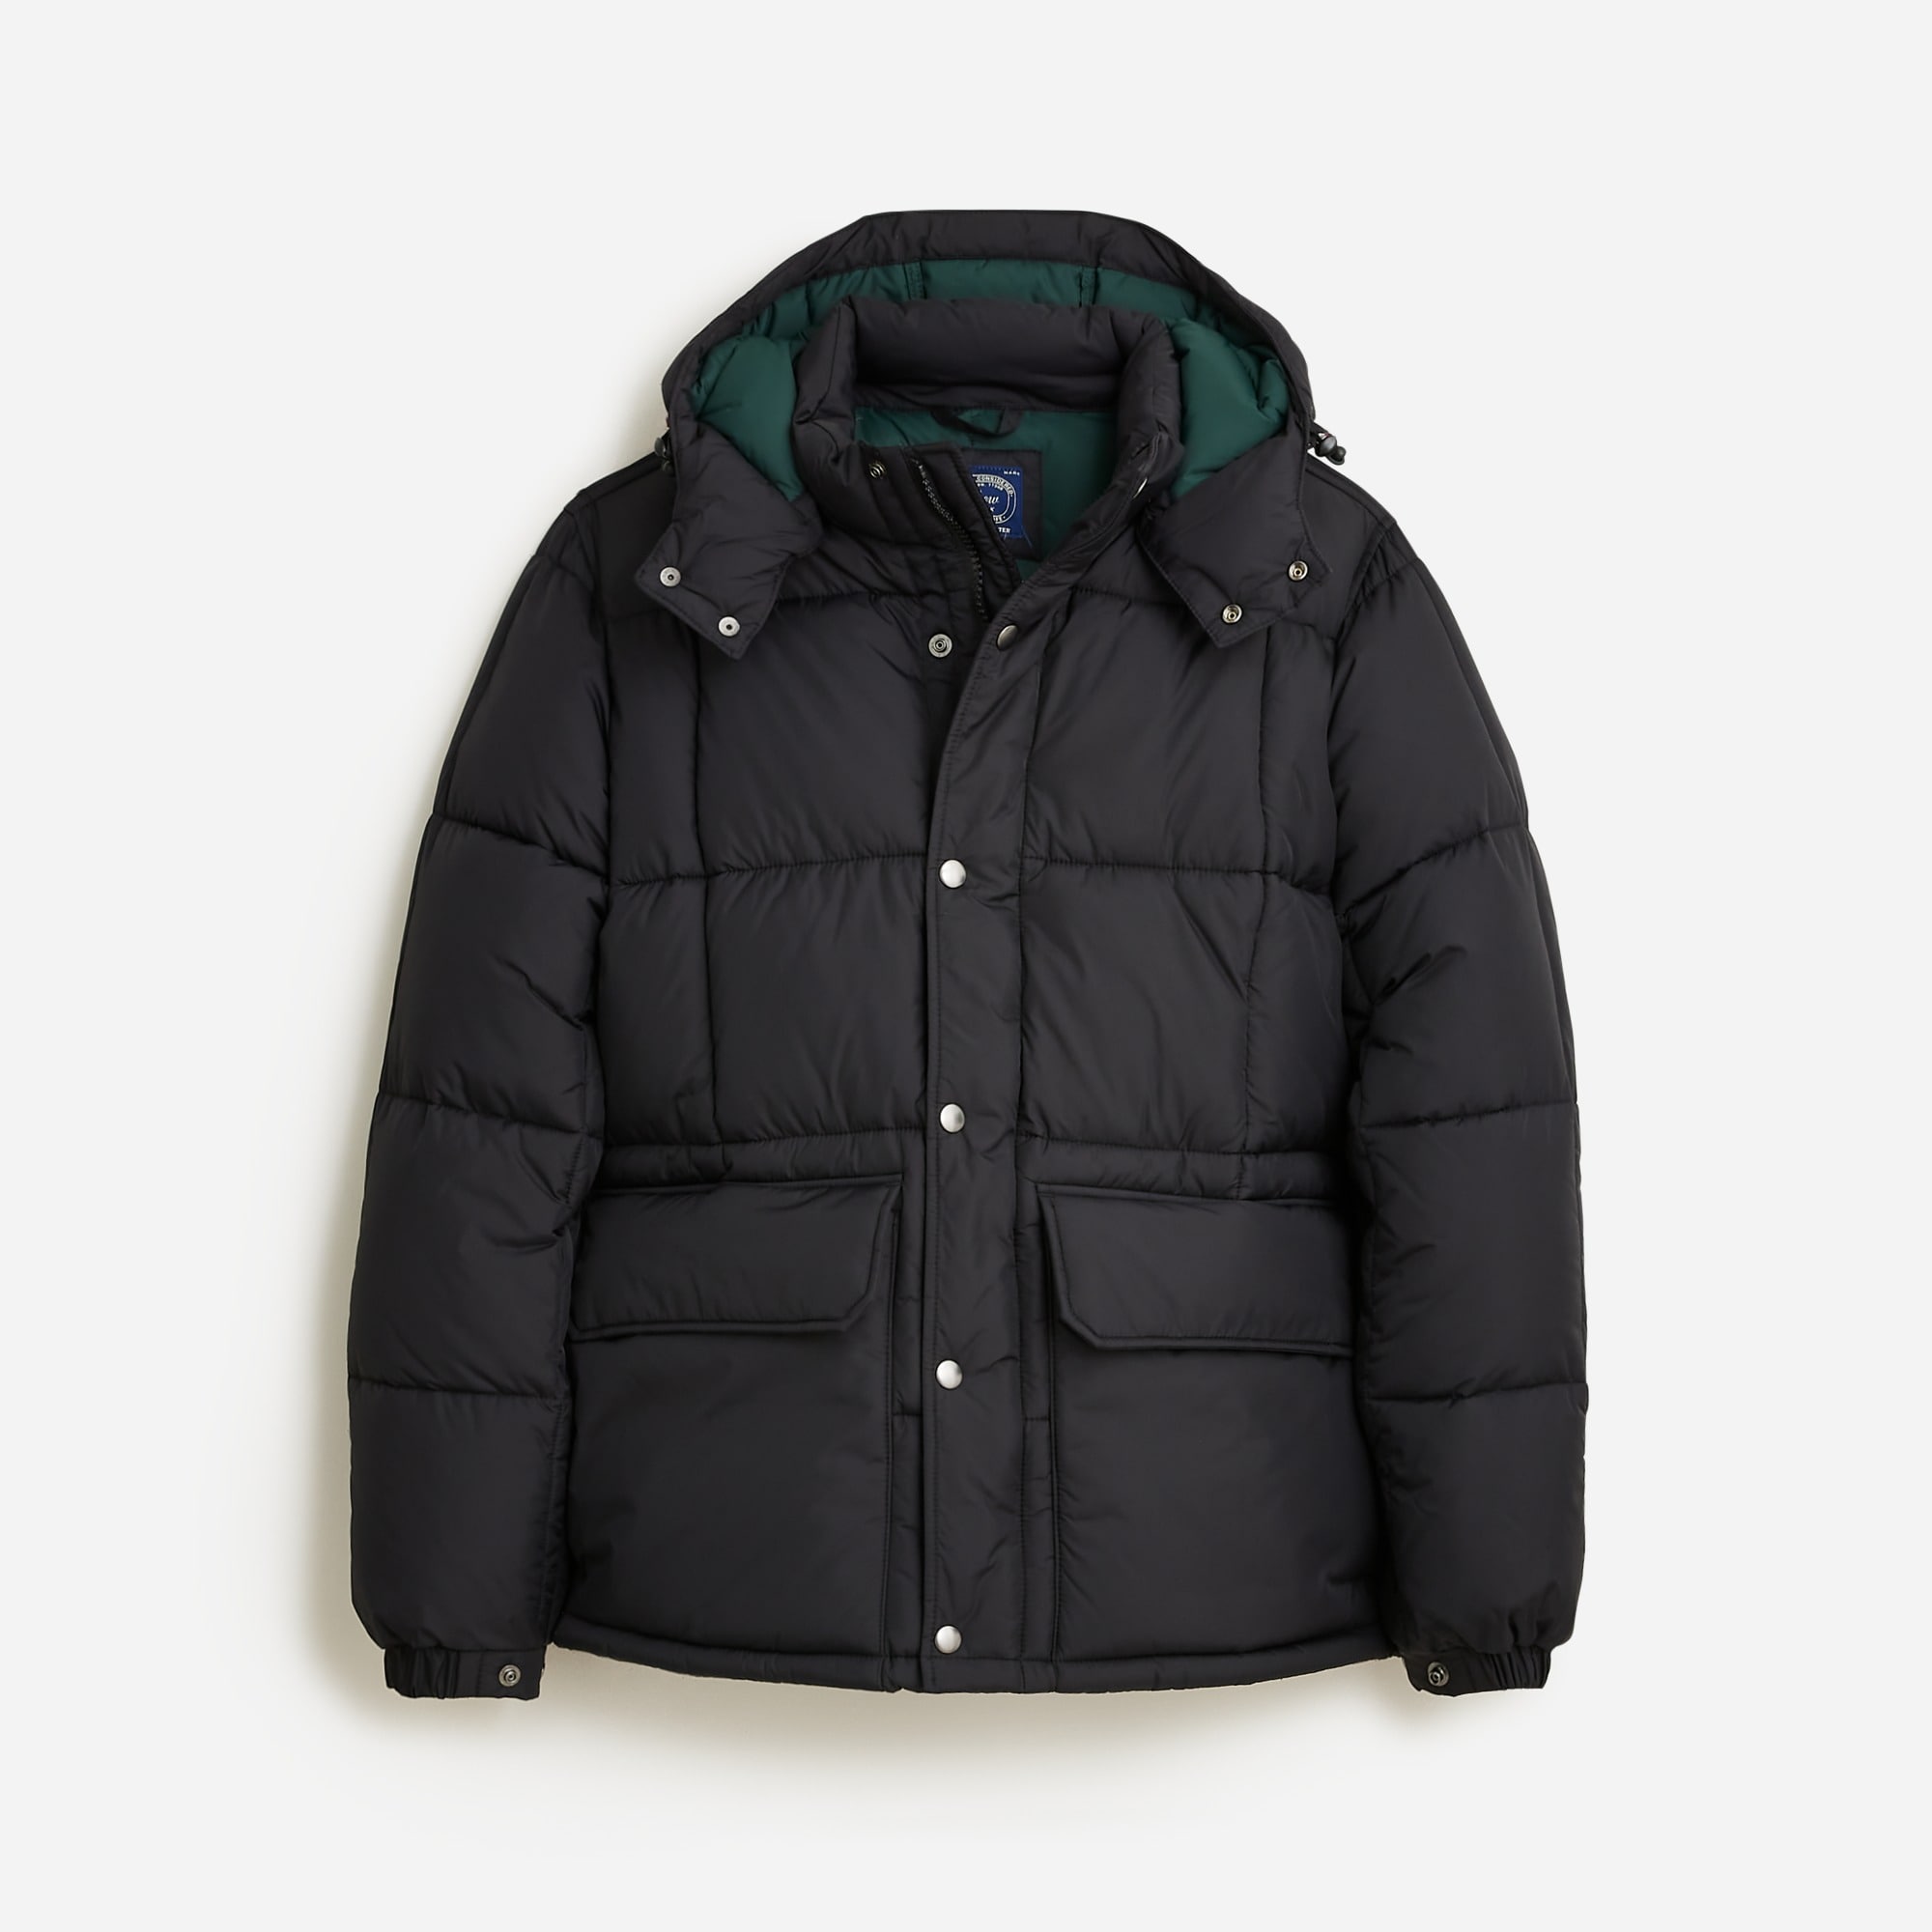  Nordic quilted puffer jacket with PrimaLoft&reg;